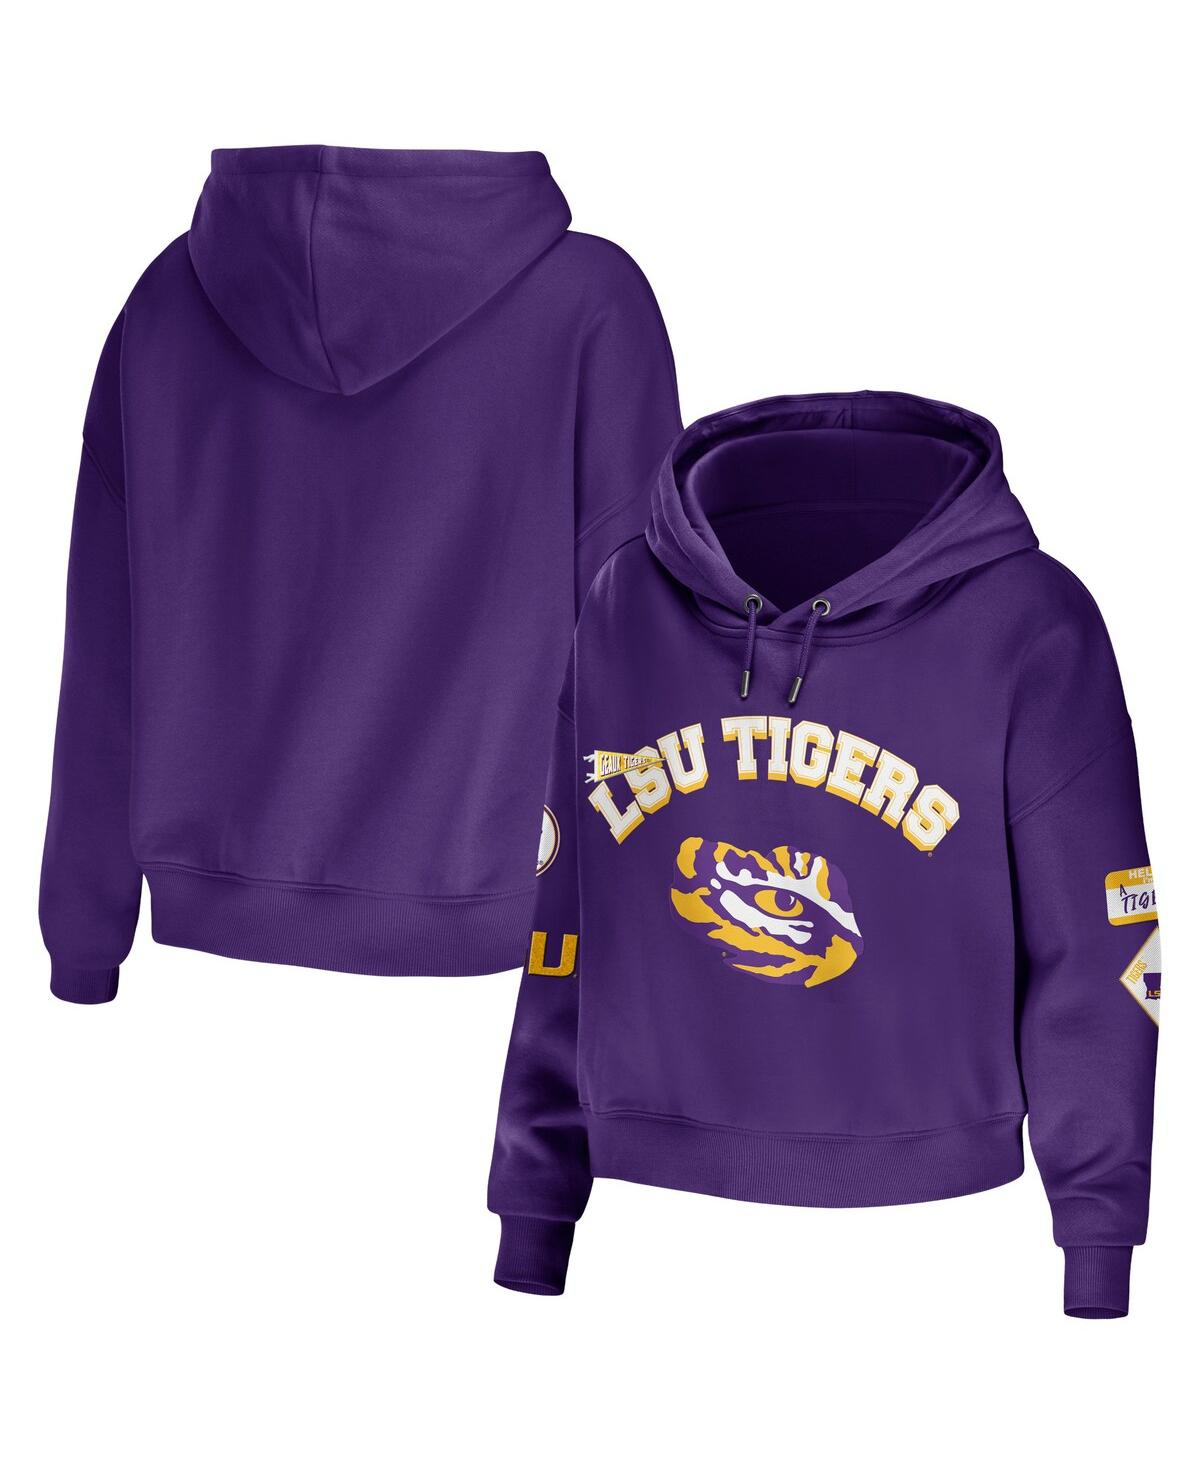 Shop Wear By Erin Andrews Women's  Purple Lsu Tigers Mixed Media Cropped Pullover Hoodie